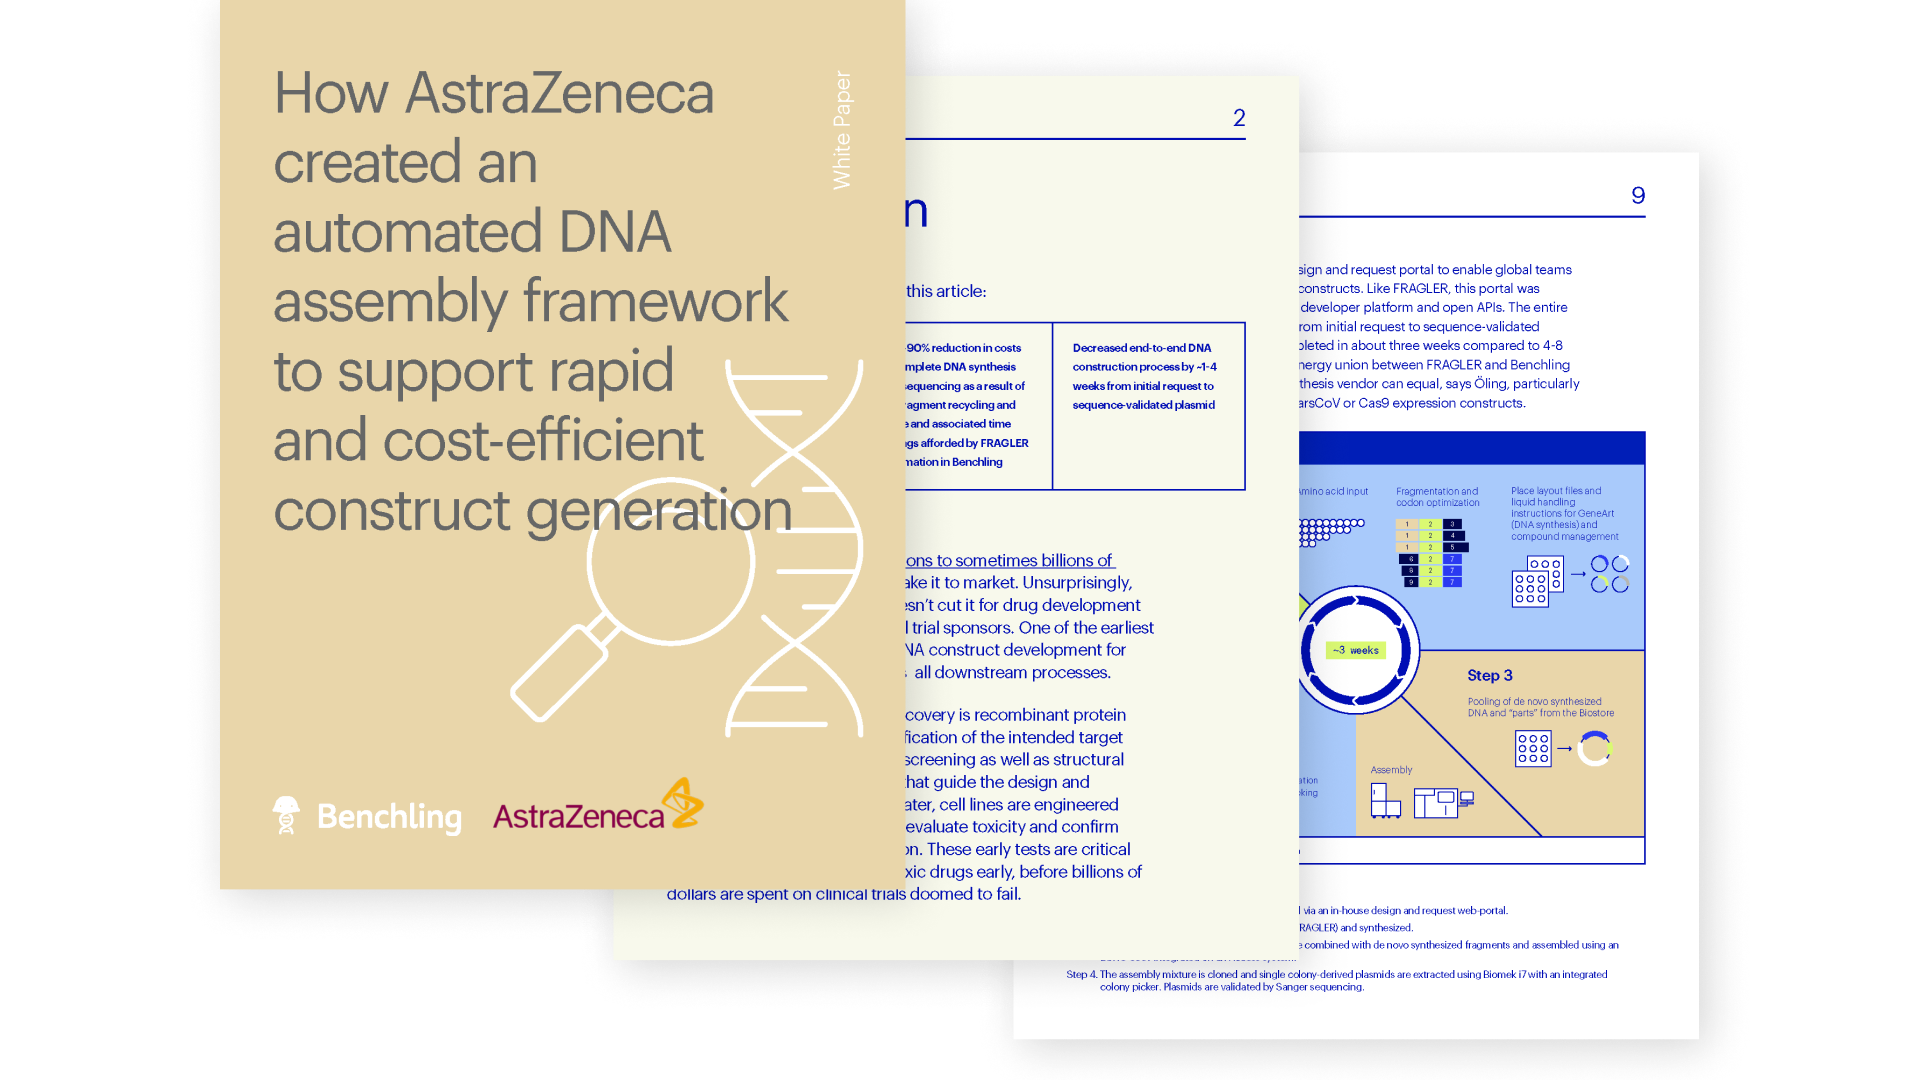 how-astrazeneca-created-an-automated-dna-assembly-framework-PP.png